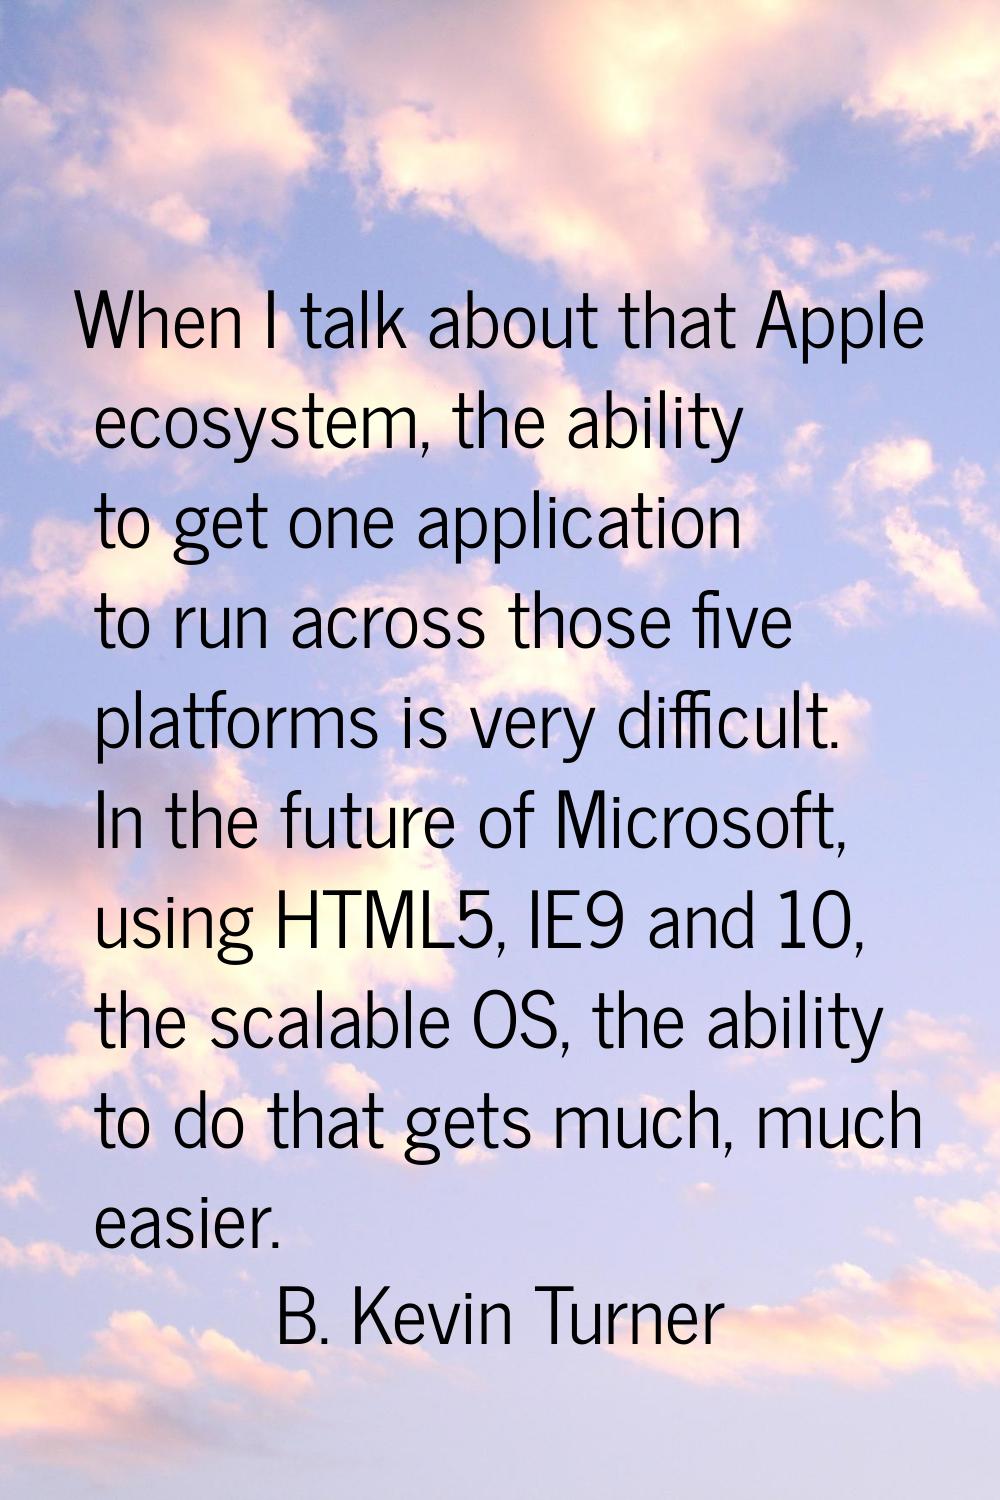 When I talk about that Apple ecosystem, the ability to get one application to run across those five